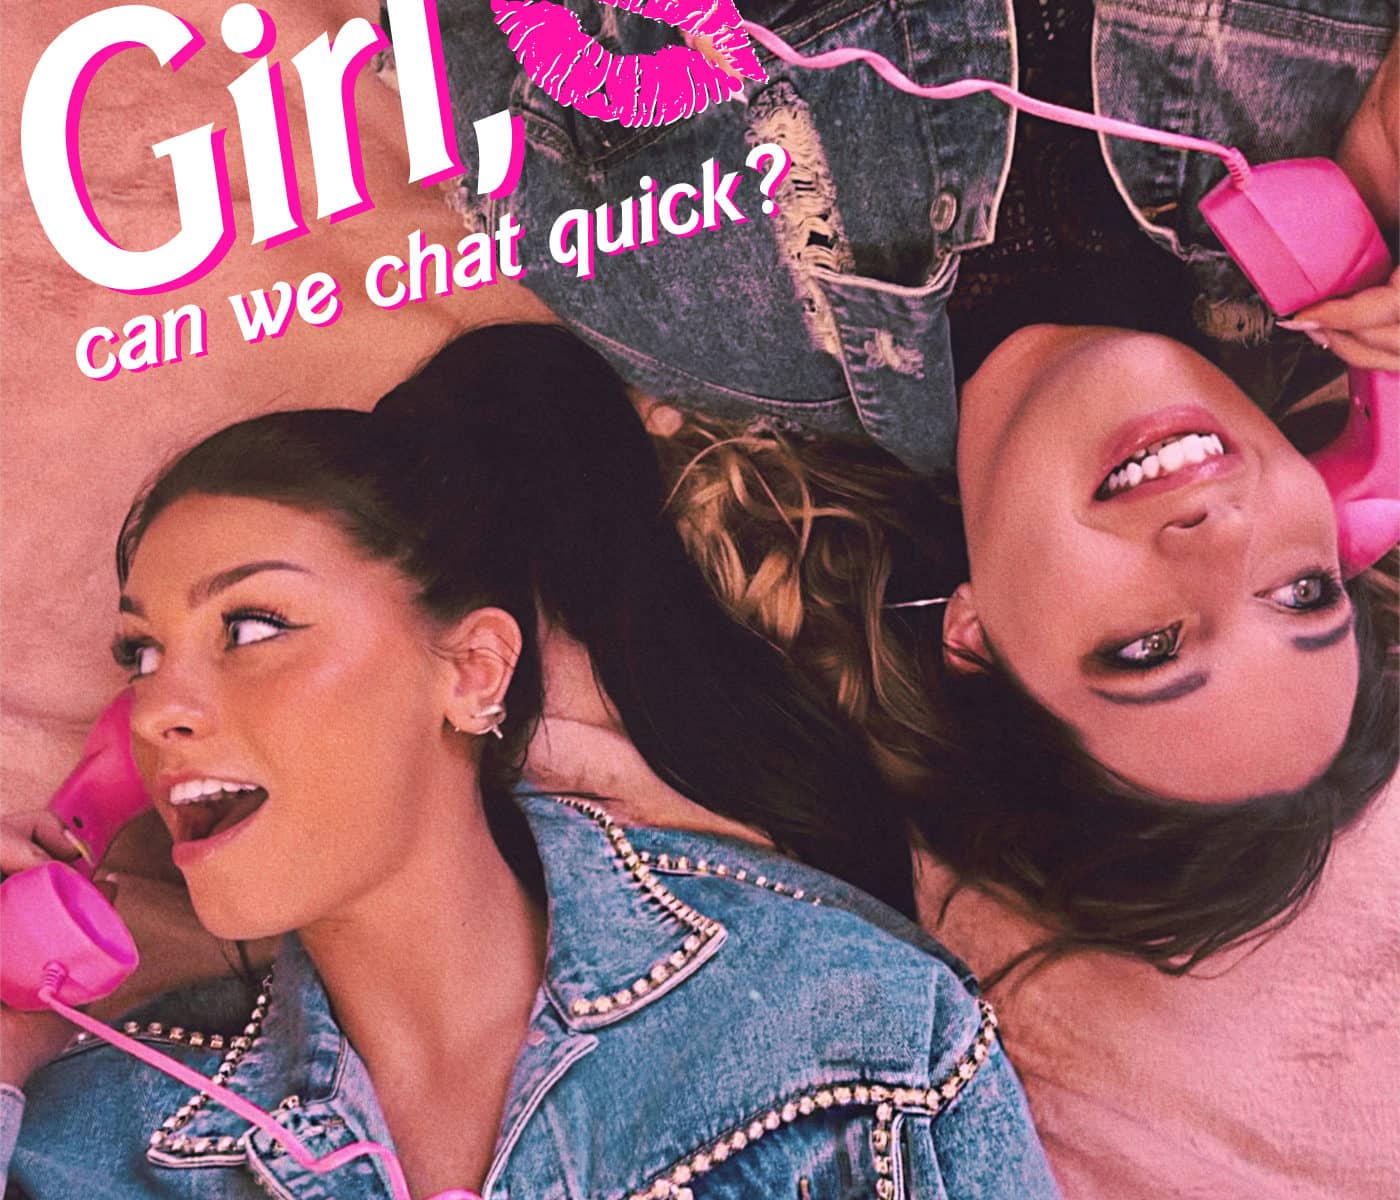 girl_can_we_chat_quick_podcast-16